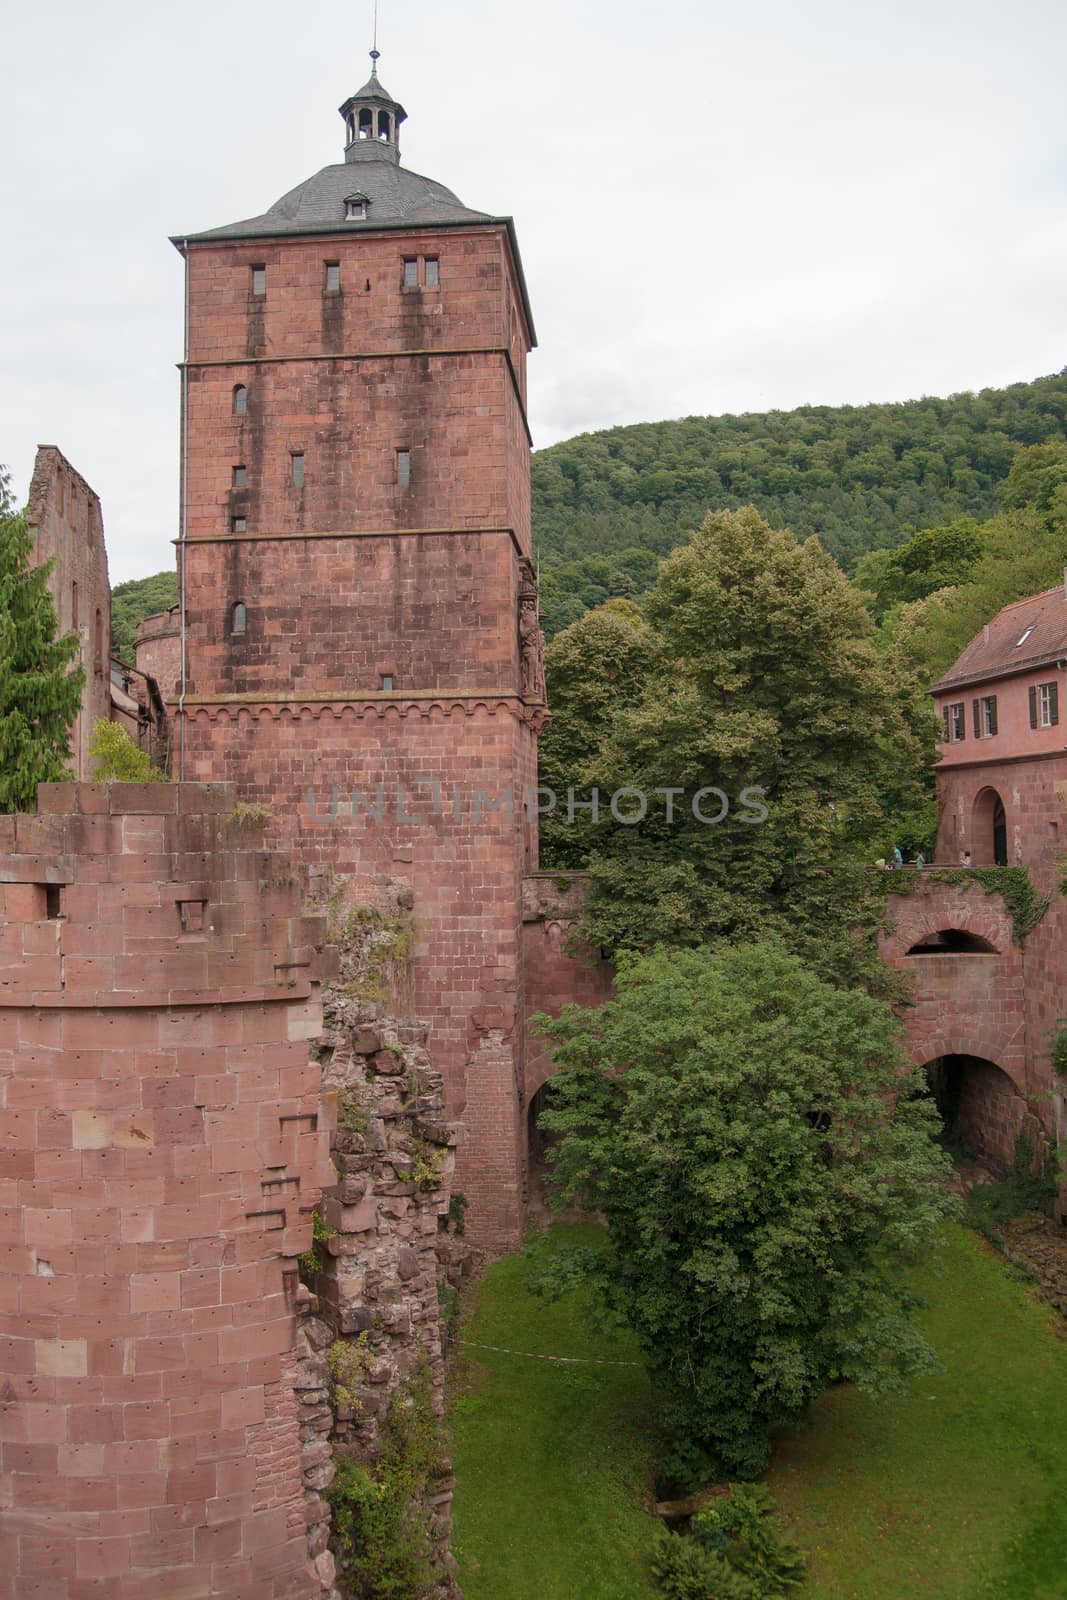 Romantic and beautiful Heidelberg castle for europe tourism